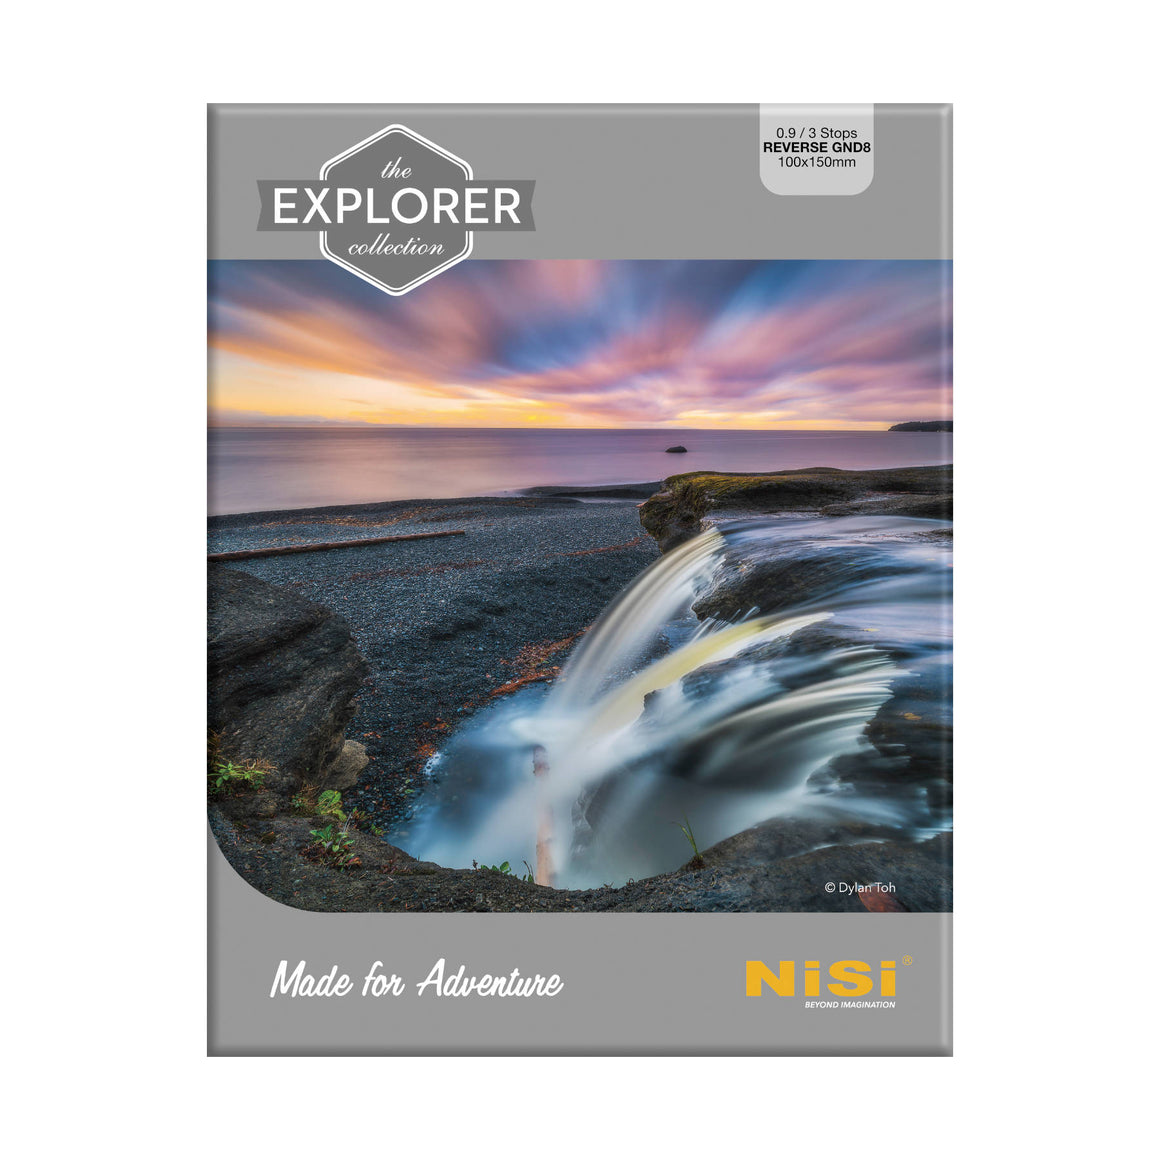 nisi-explorer-collection-100x150mm-nano-ir-reverse-graduated-neutral-density-filter-gnd8-0-9-3-stop